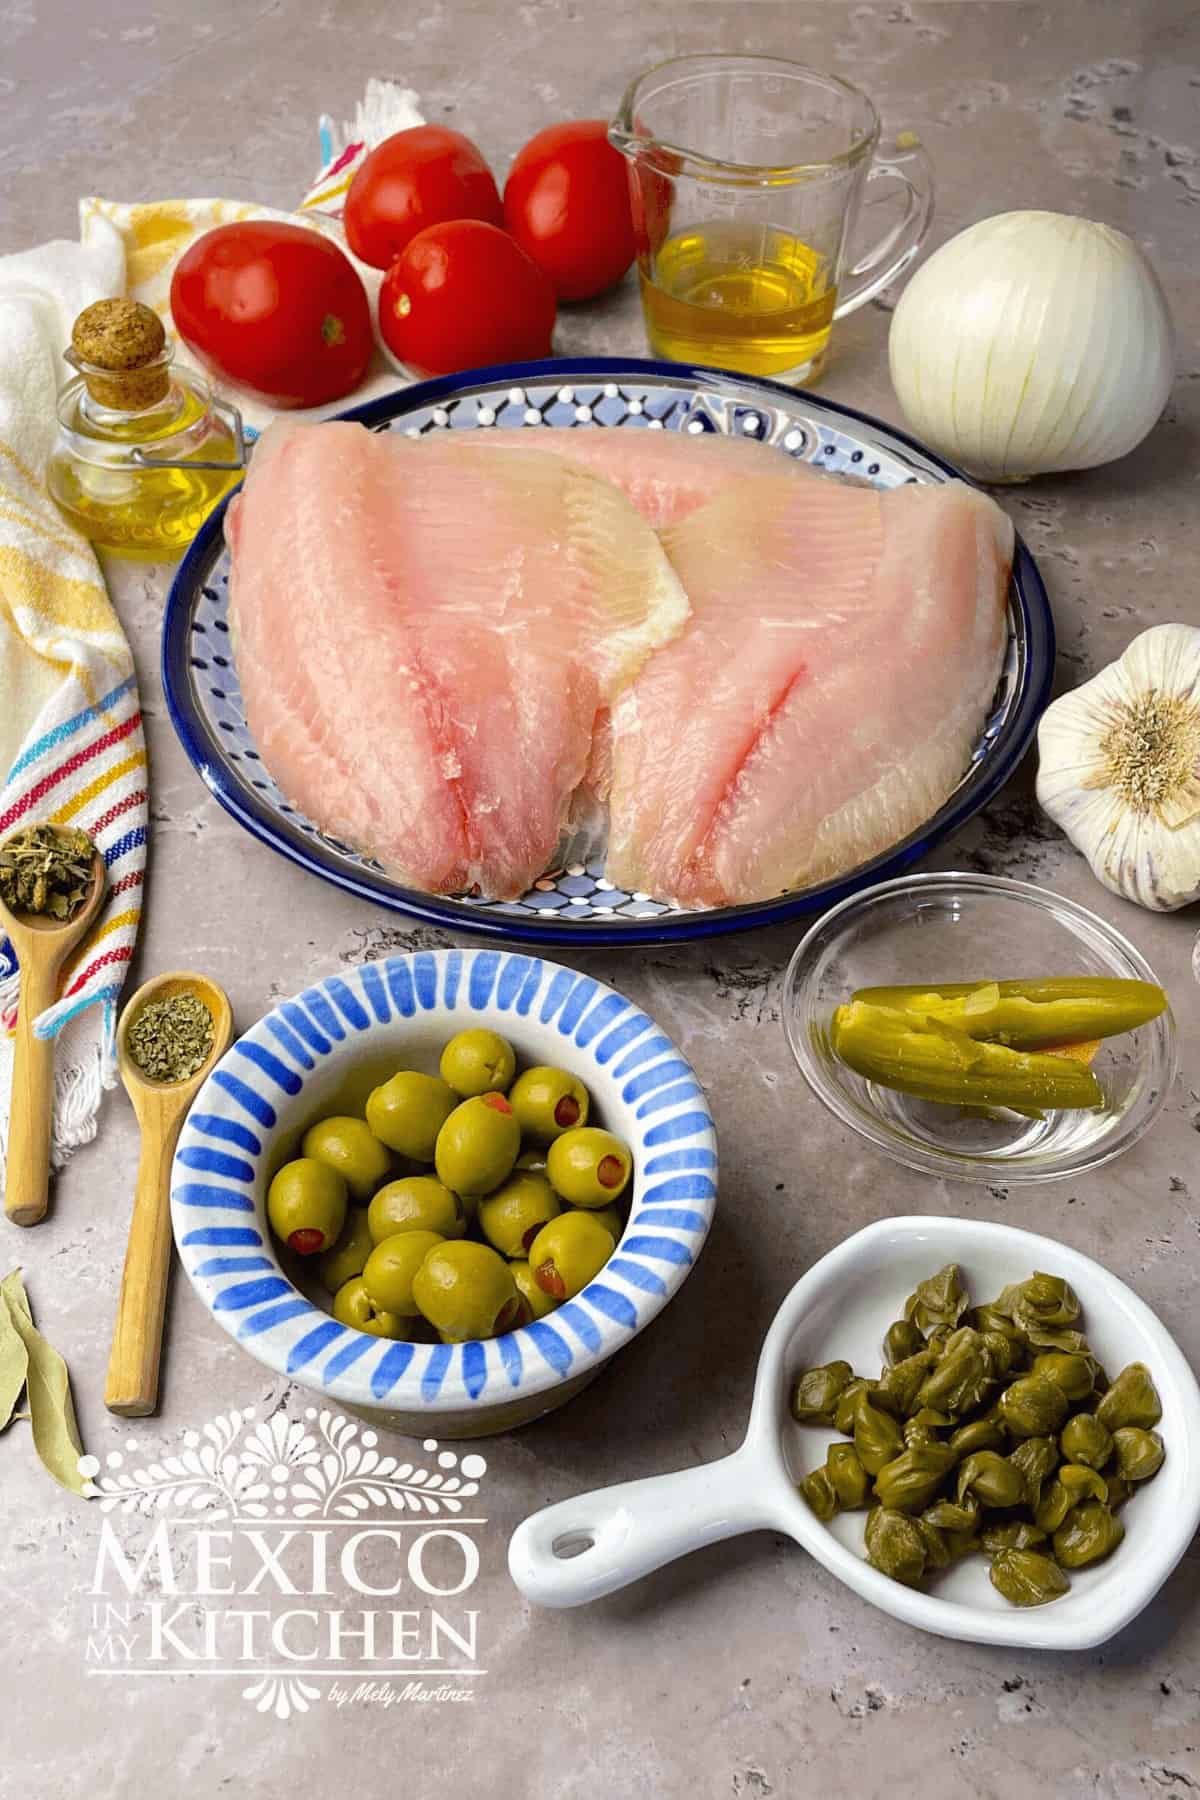 Ingredients for Tilapia Veracruz Style like white fish fillets, capers, olives, onions, tomatoes and herbs.